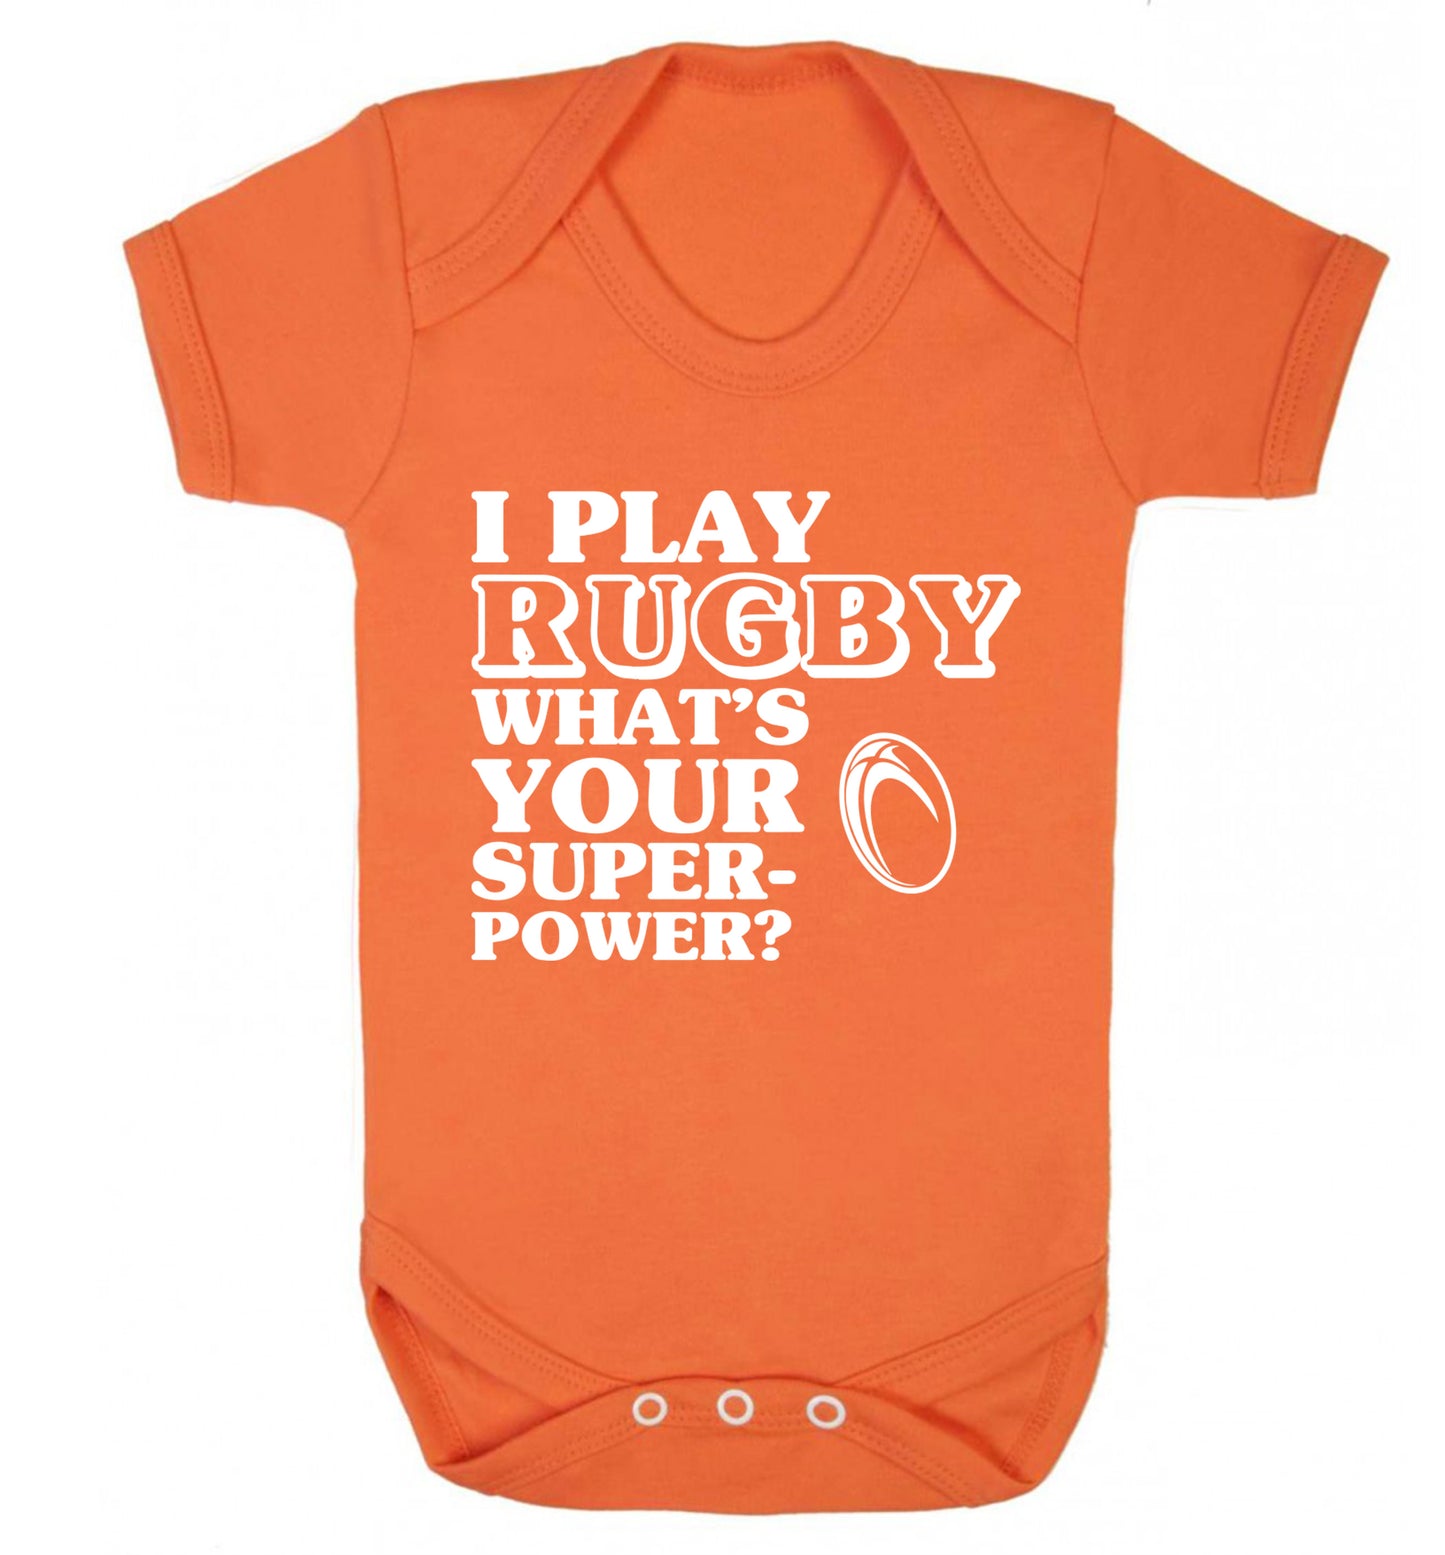 I play rugby what's your superpower? Baby Vest orange 18-24 months